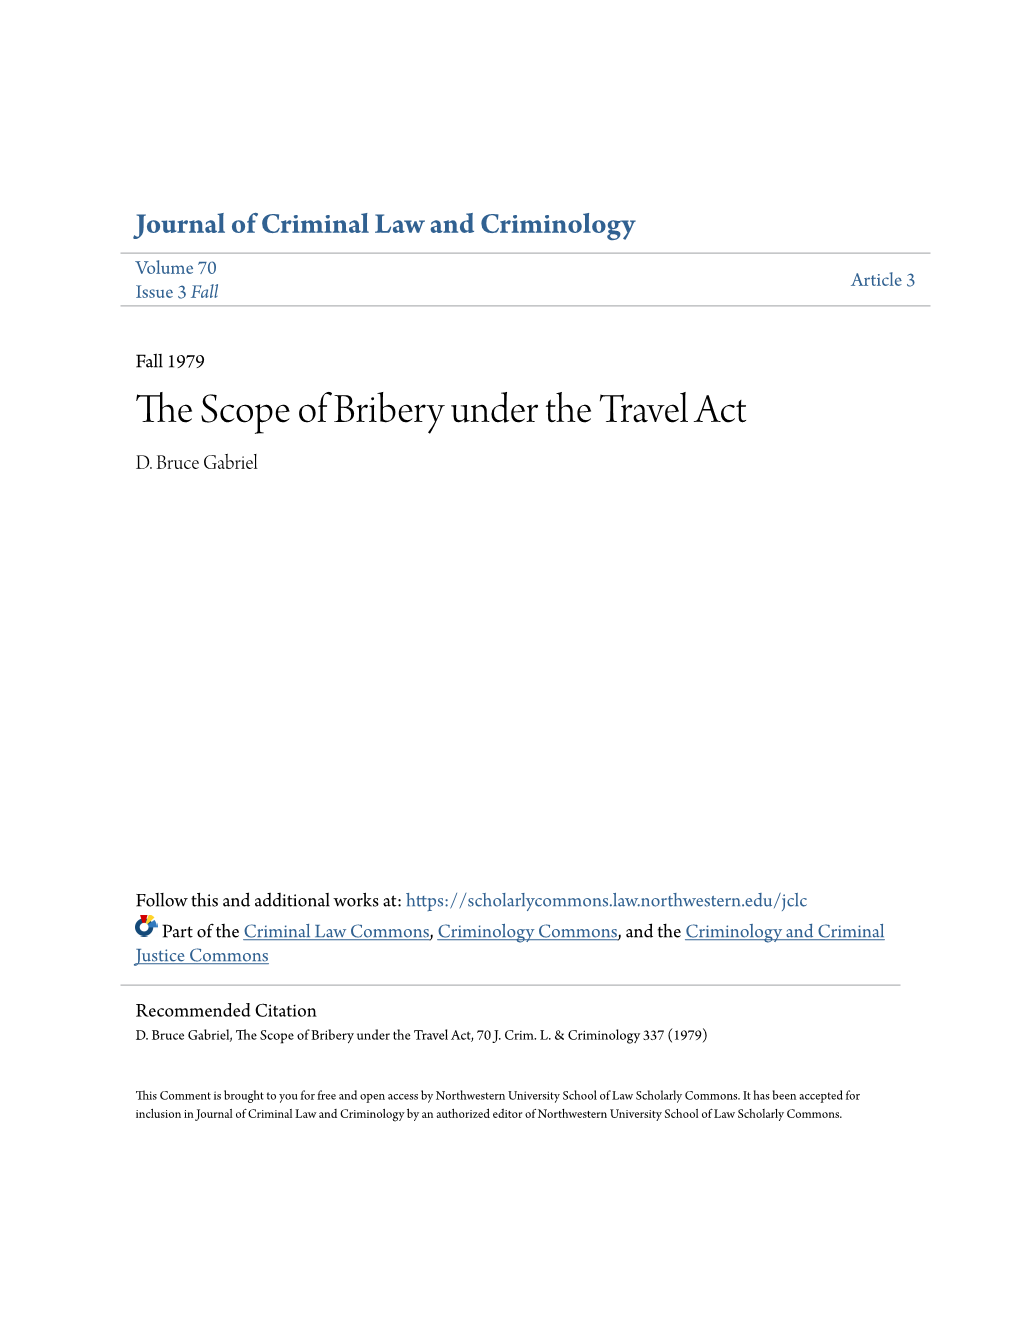 The Scope of Bribery Under the Travel Act